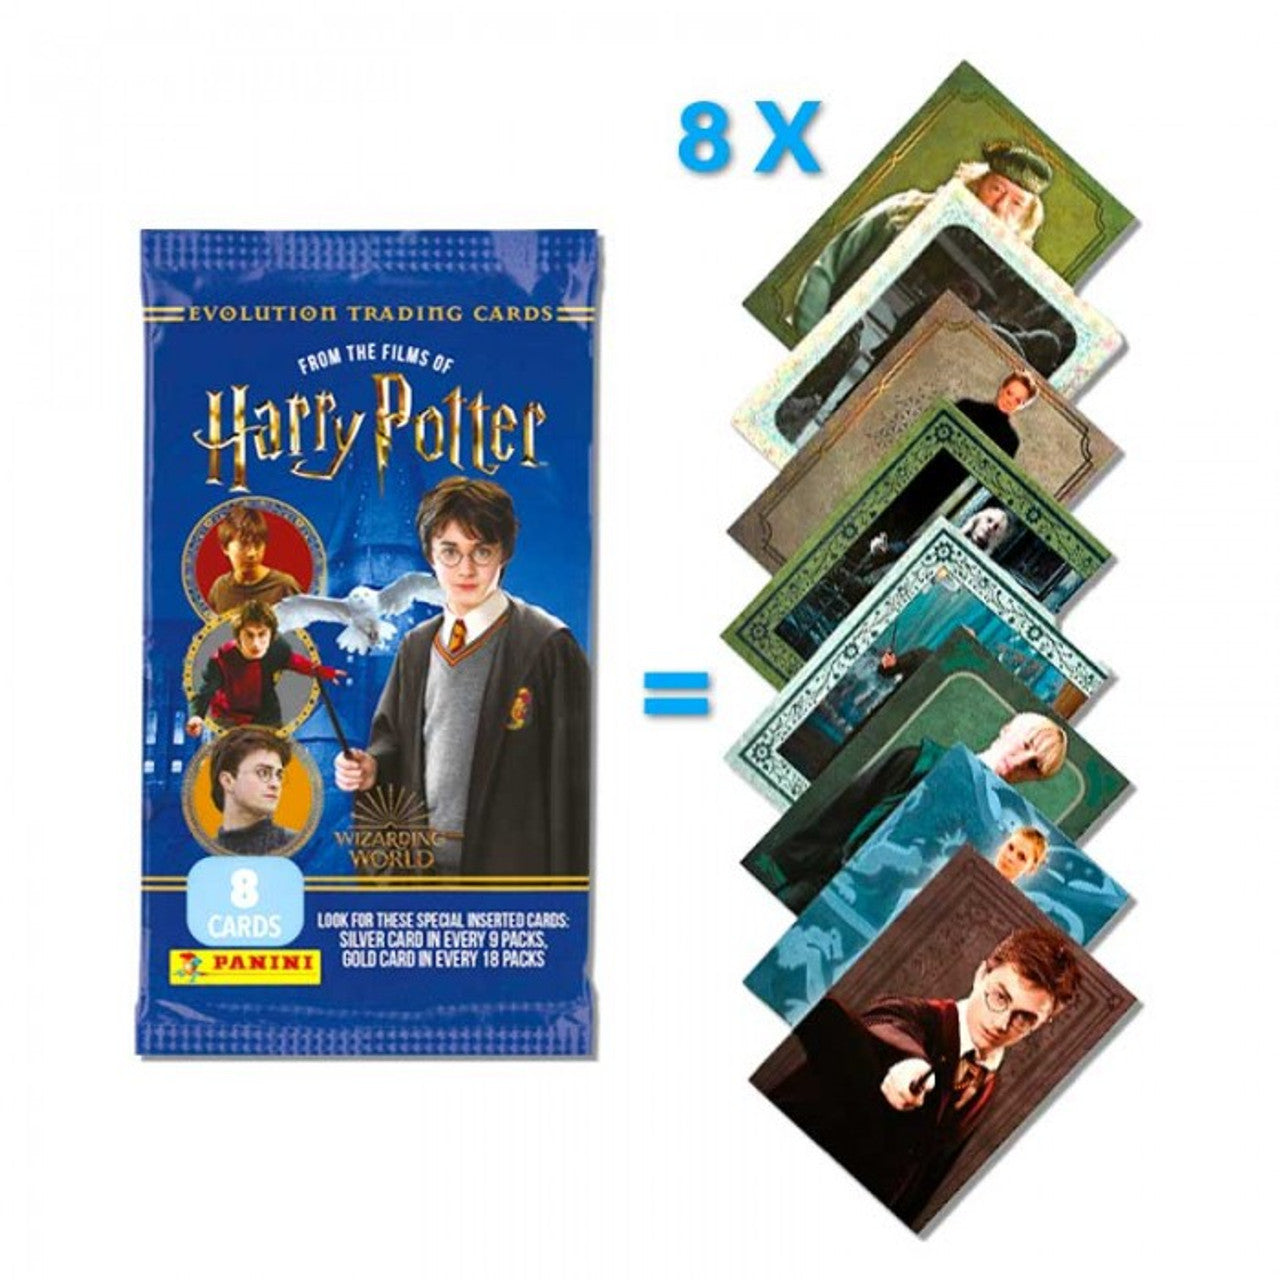 Panini - Harry Potter Trading Crads (Pack of 8)